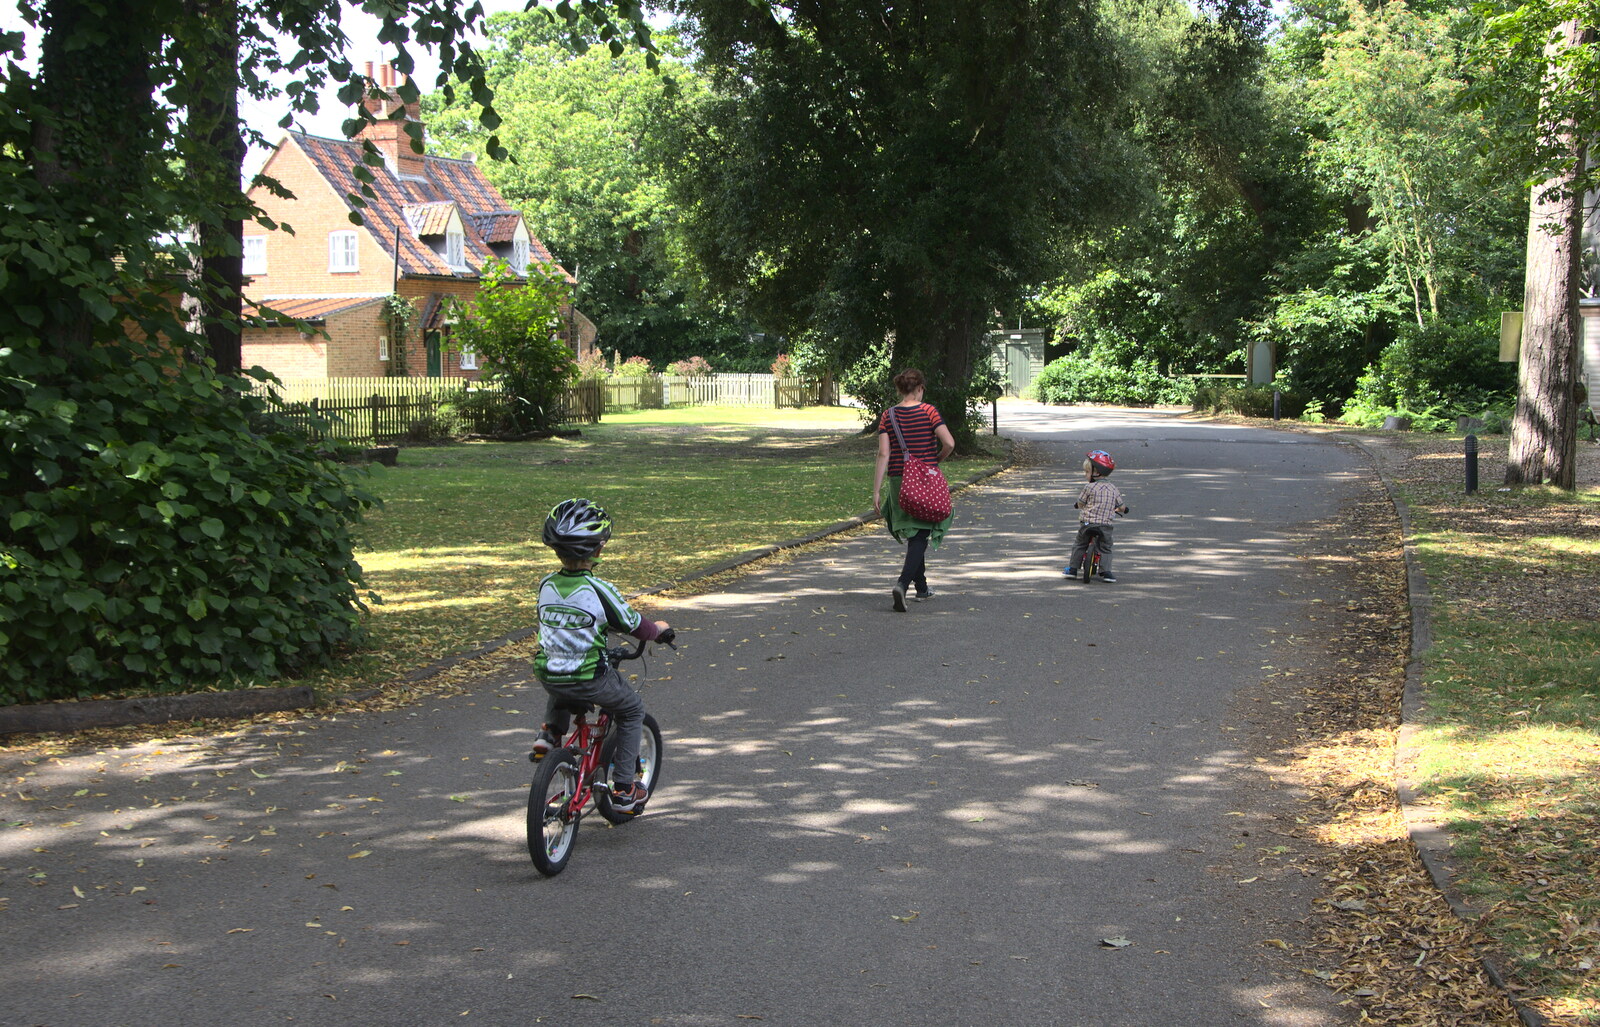 The boys head off on a bike ride from The Archaeology of Dunwich: A Camping Trip, Dunwich, Suffolk - 1st August 2015